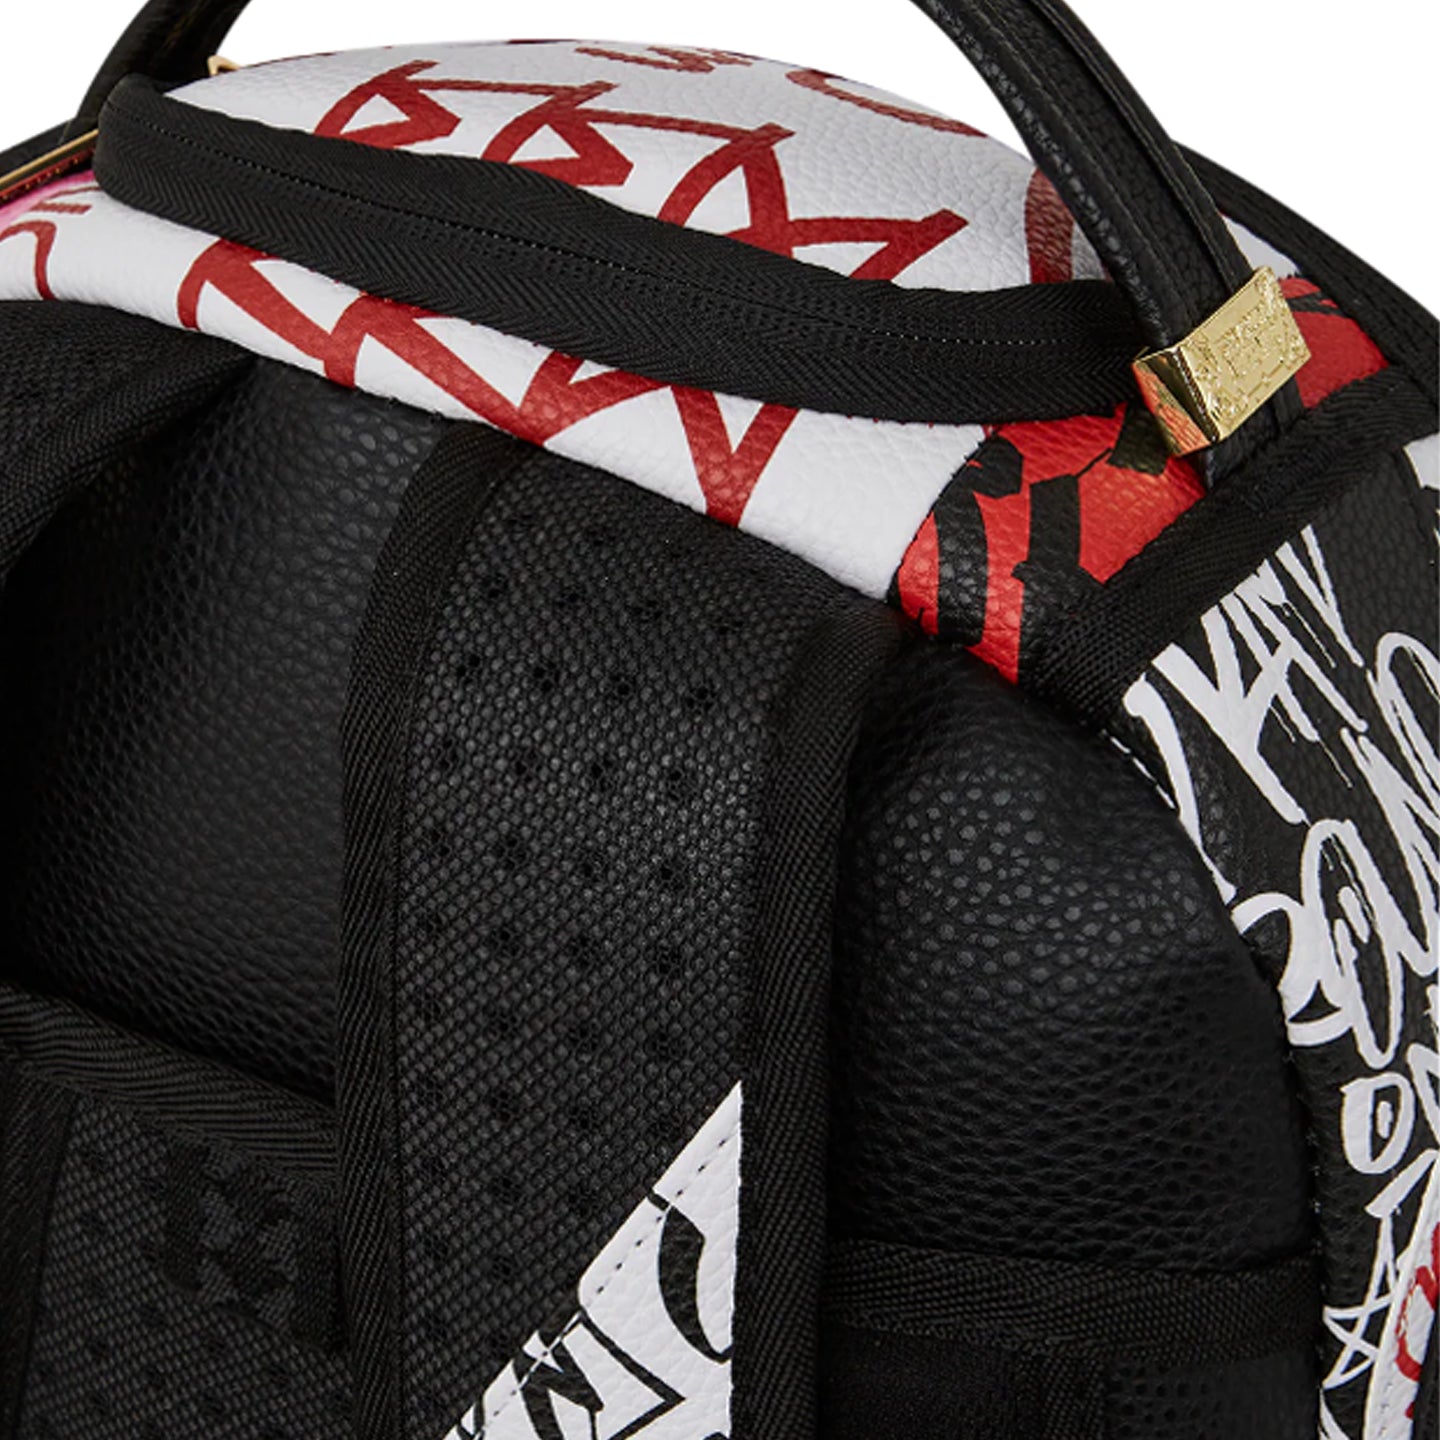 Sprayground - Scribble Me Rich Backpack